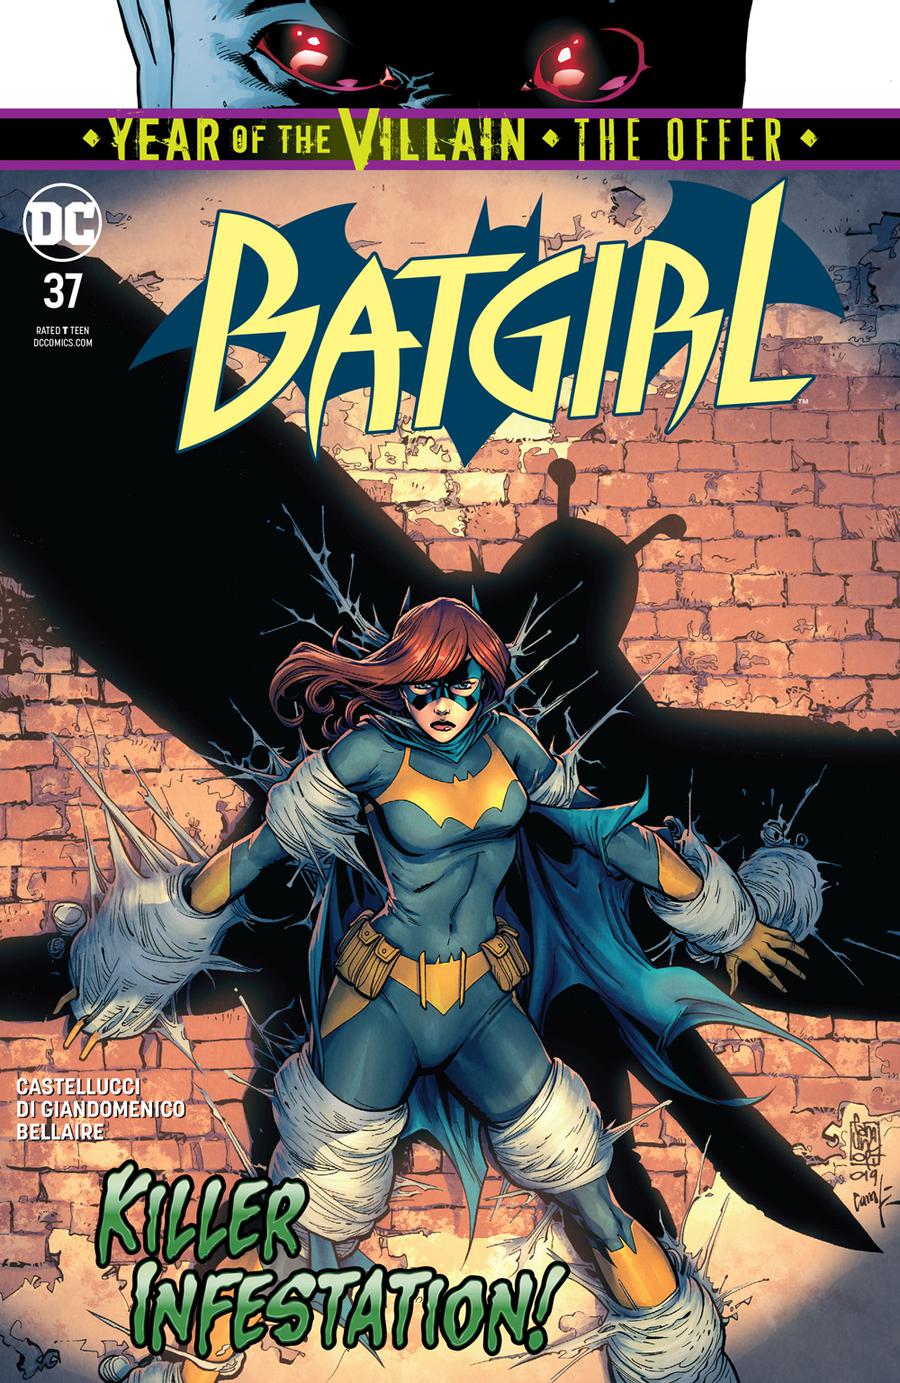 Batgirl Vol 5 #37 Cover A Regular Giuseppe Camuncoli & Cam Smith Cover (Year Of The Villain The Offer Tie-In)